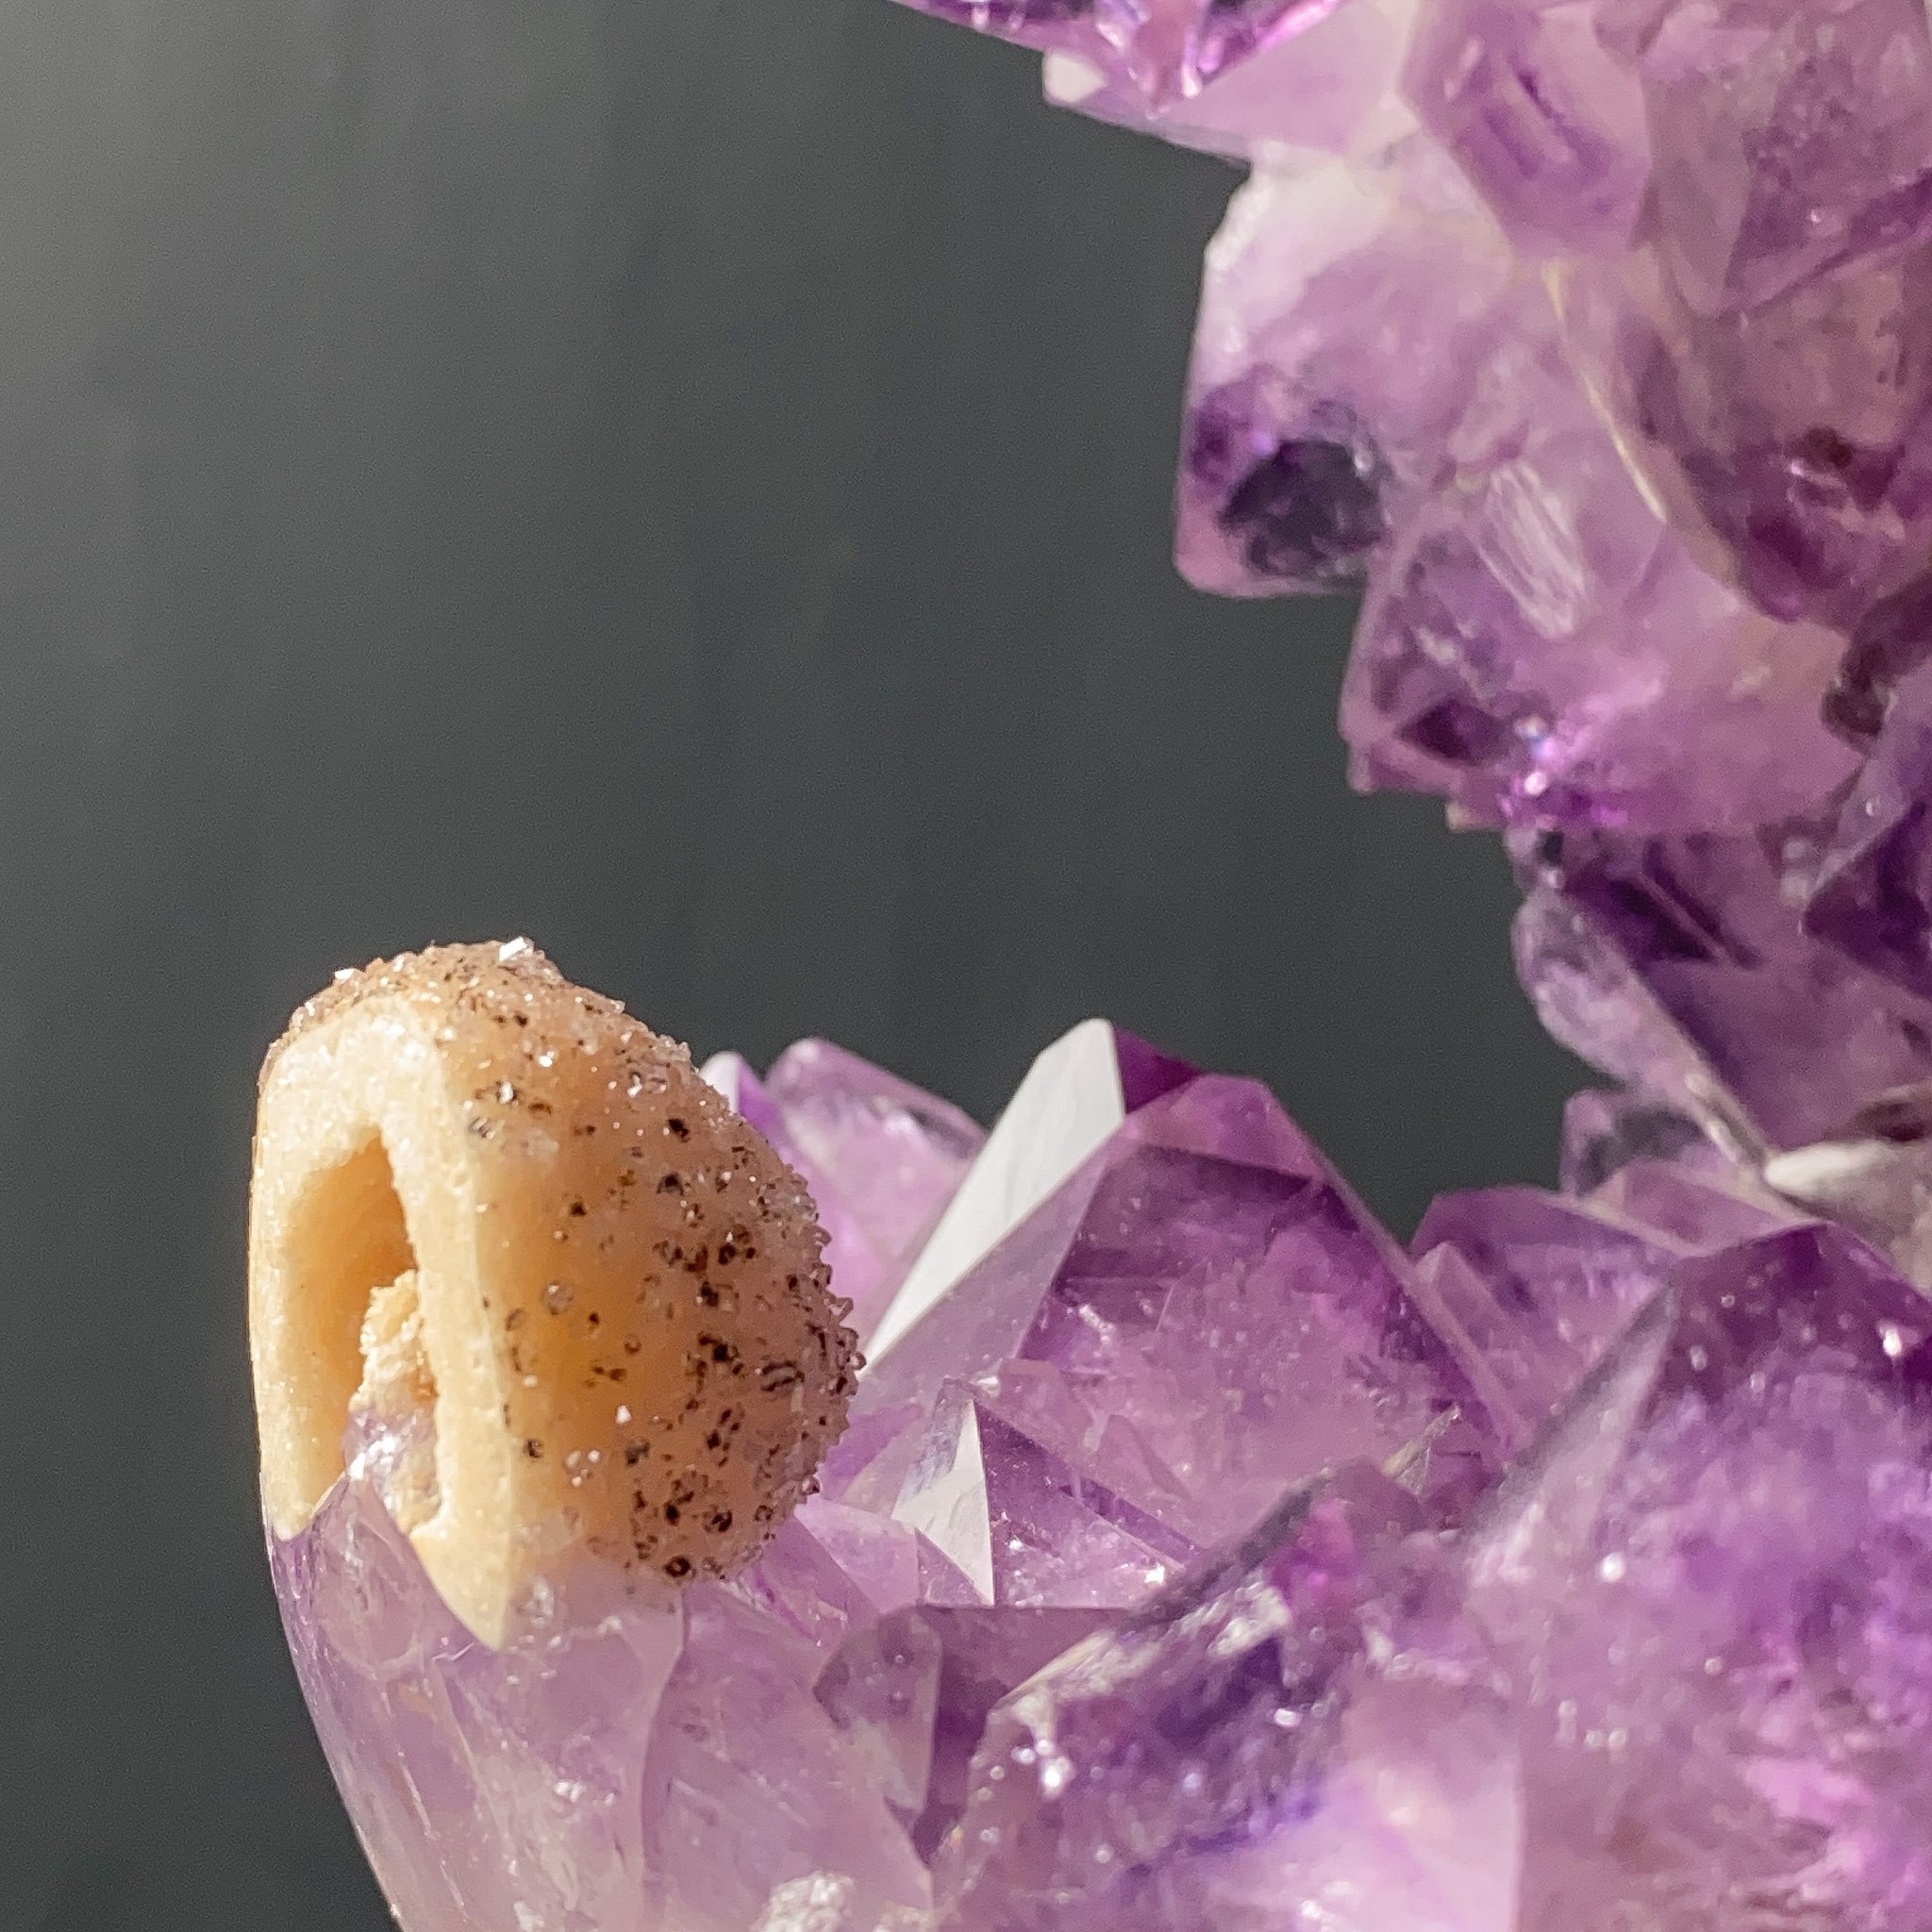 AMETHYST SPHERE WITH CALCITE GEODE